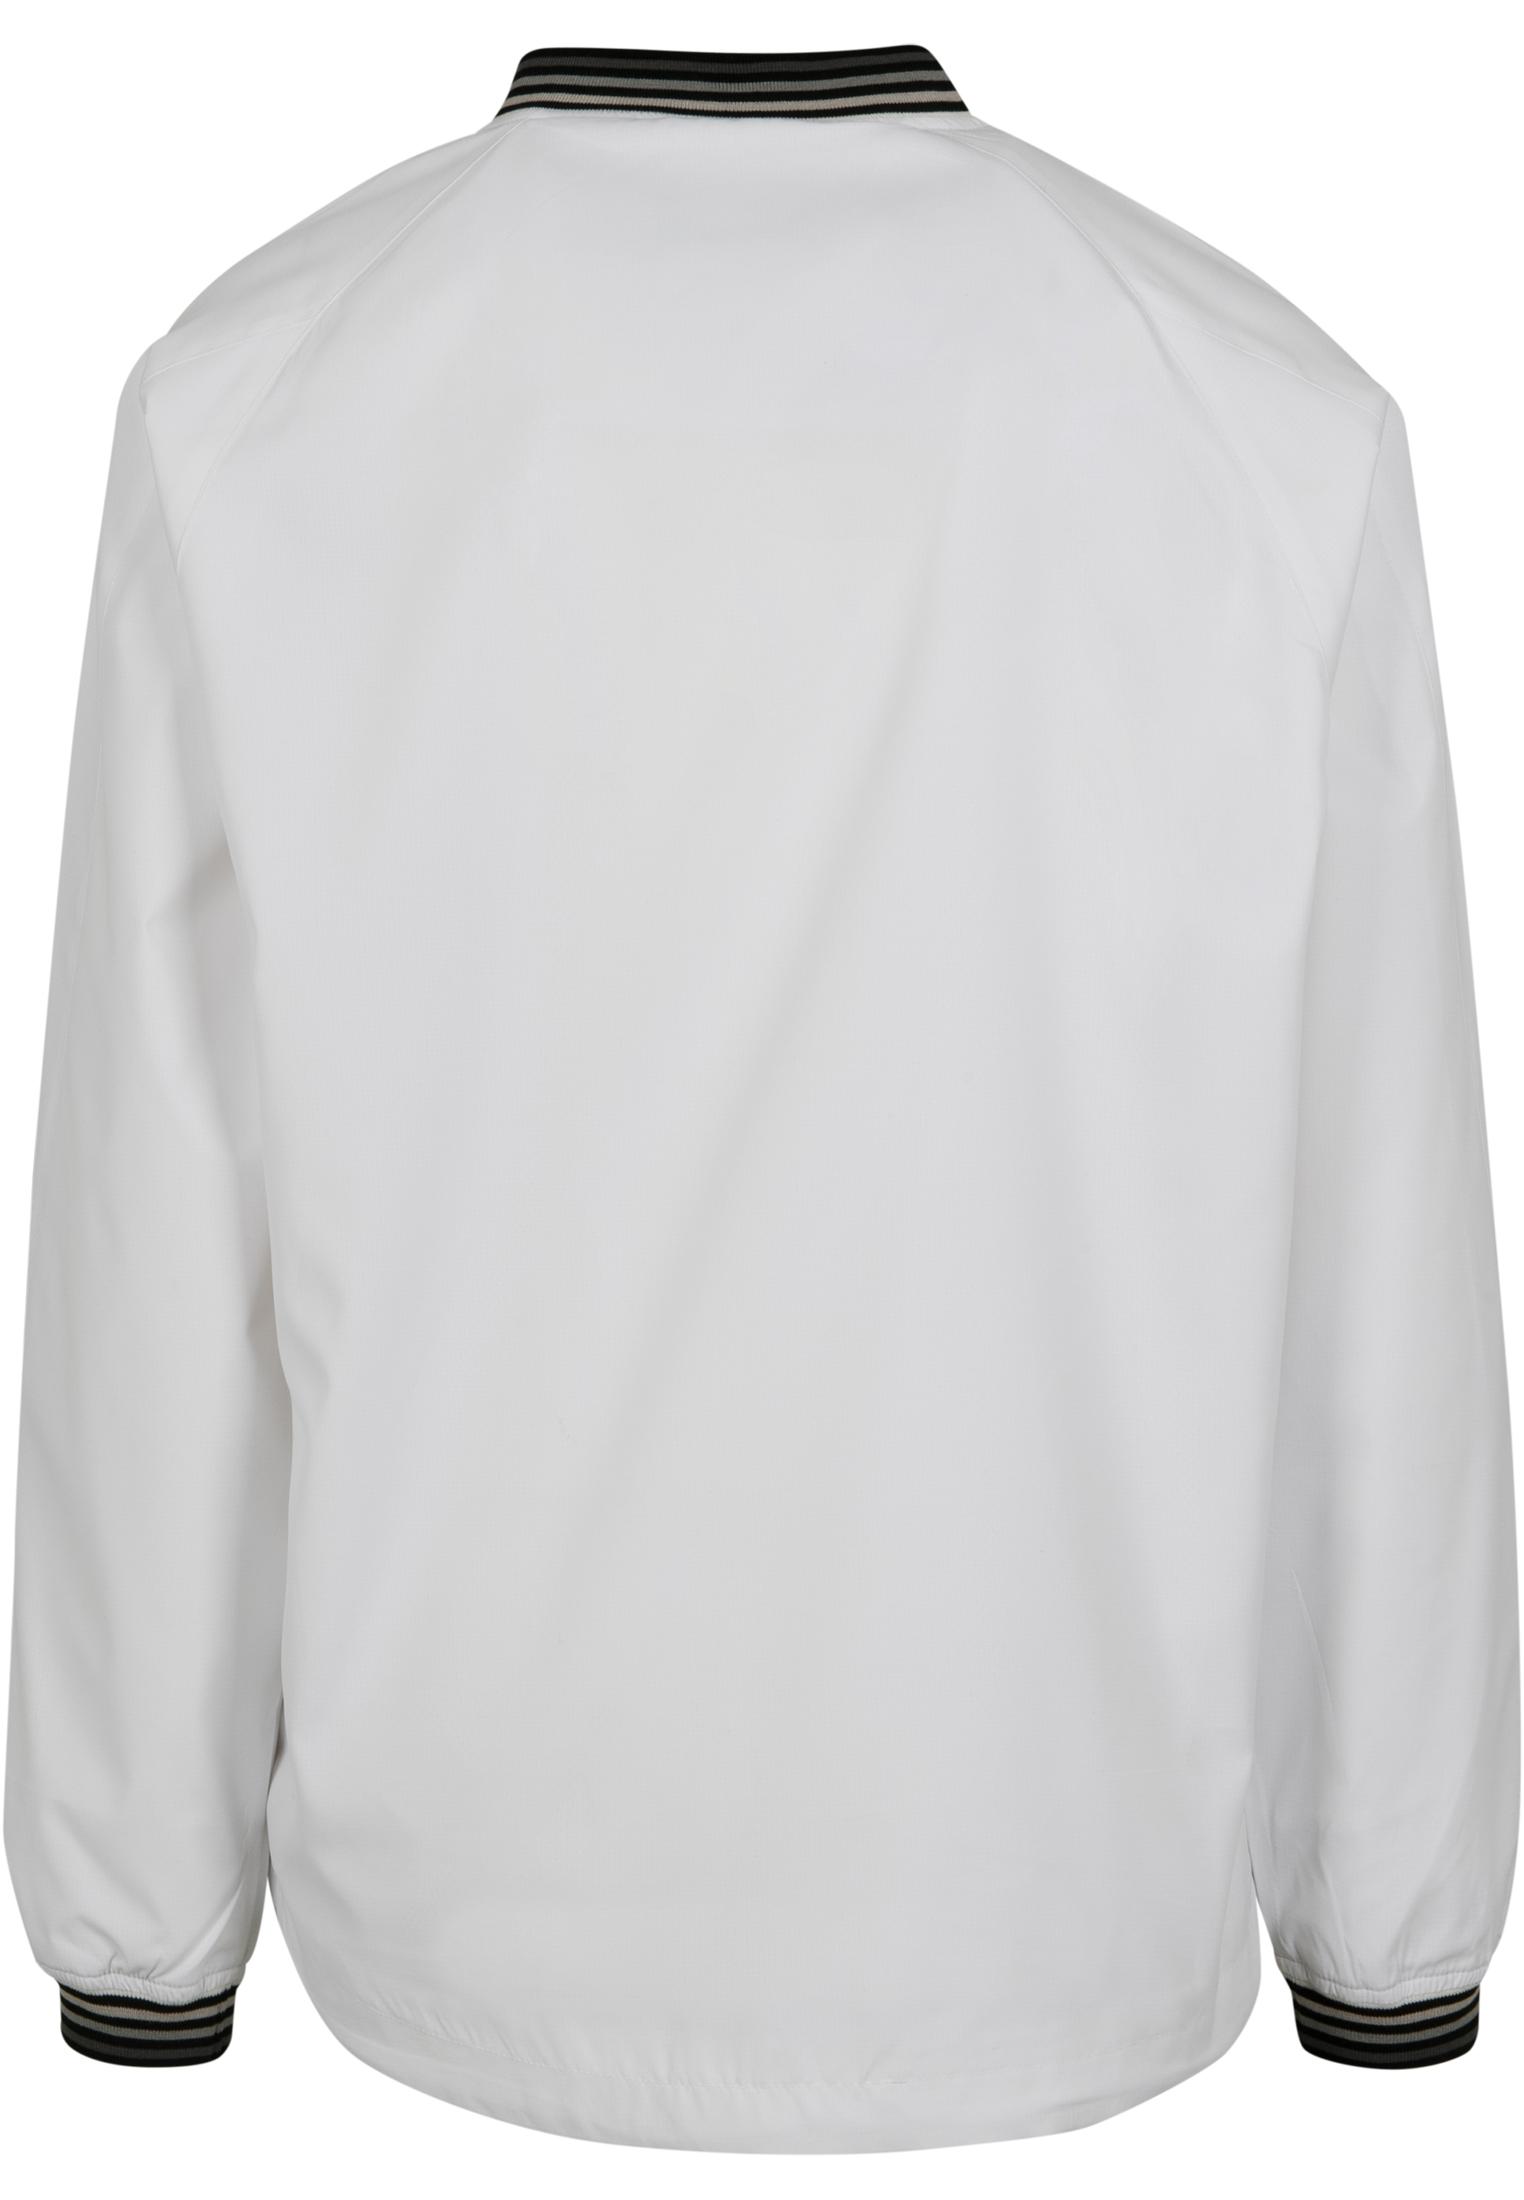 UC Men Warm Up Pull Over (Farbe: wht/gry / Größe: S)